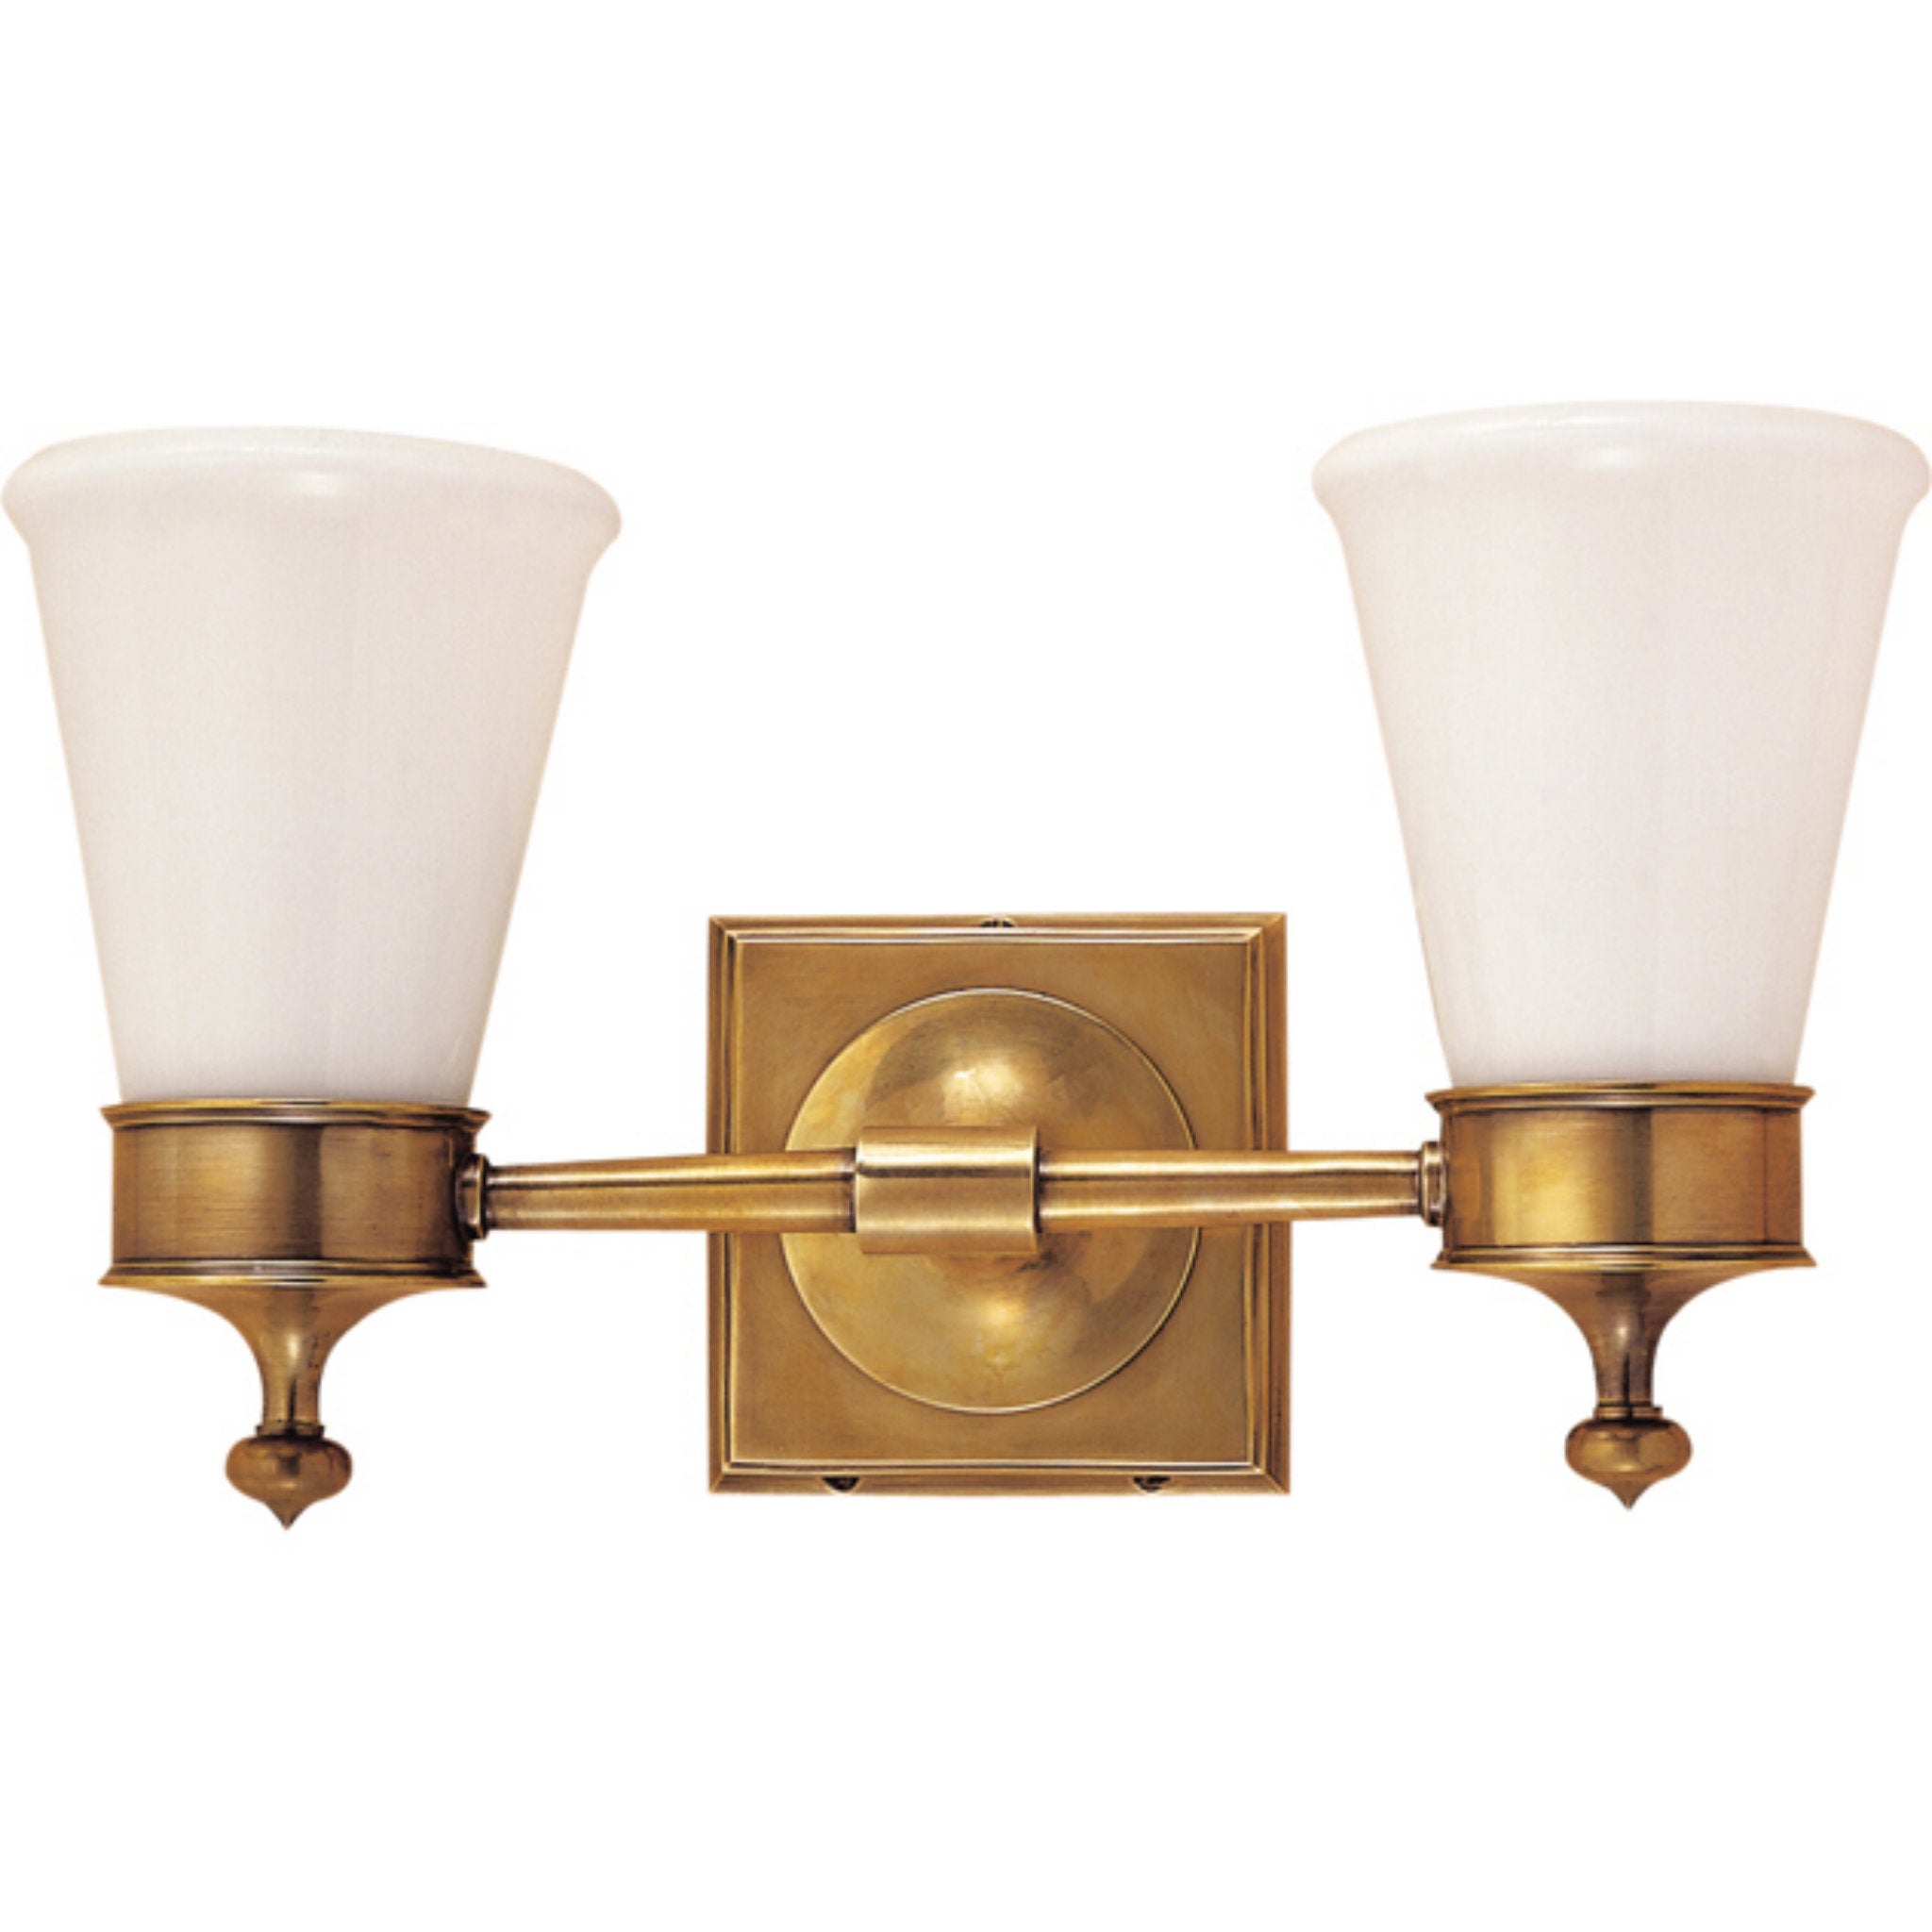 Visual Comfort Siena Double Sconce in Hand-Rubbed Antique Brass with White Glass